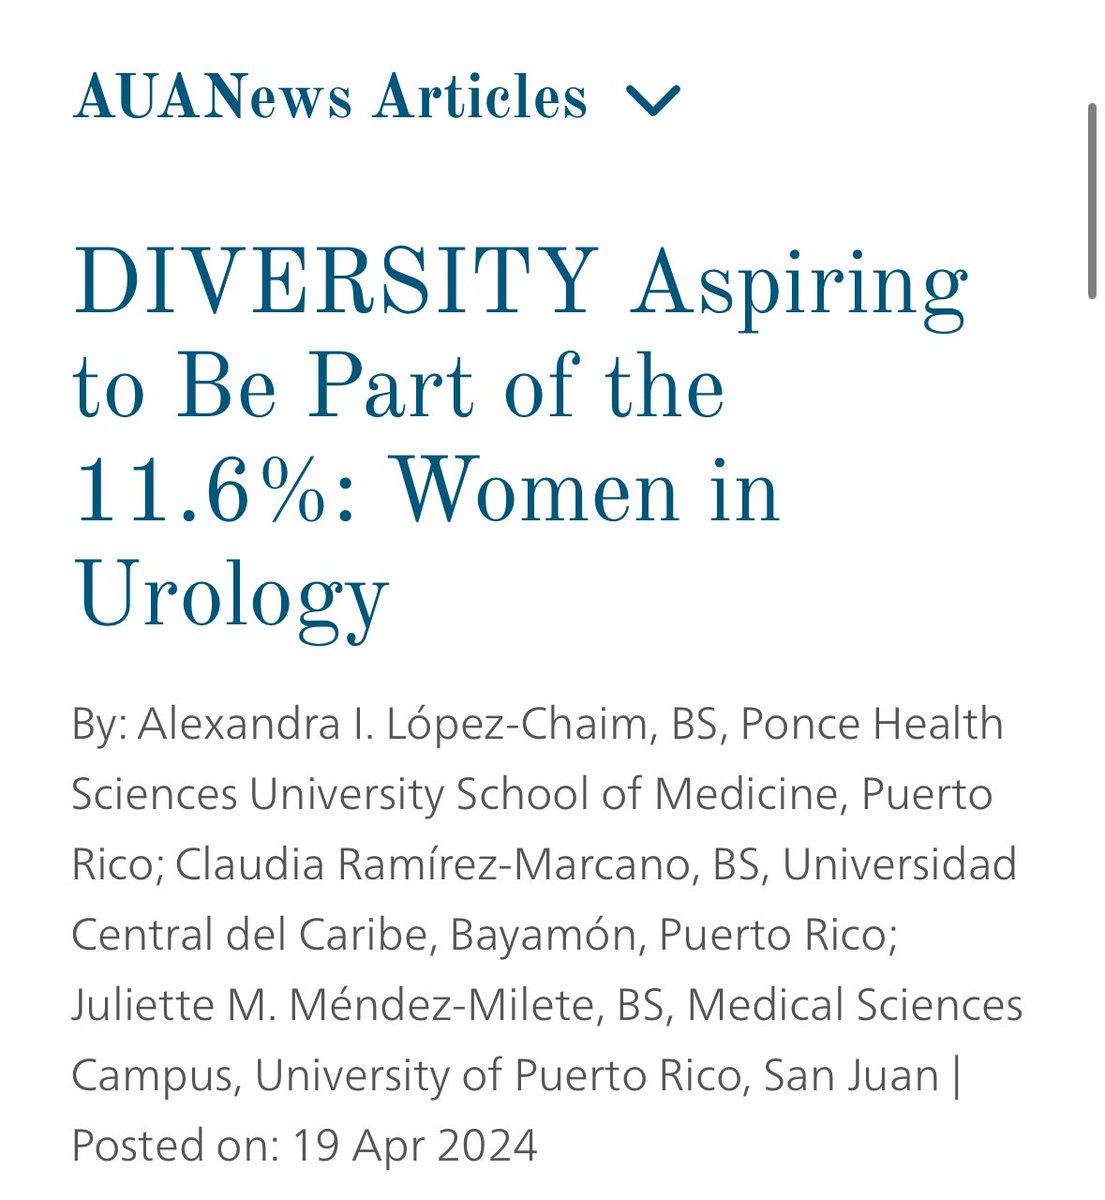 Thrilled to finally be able share with you our work in the AUA News Diversity, Equity and Inclusion Issue of April 2024. I cannot wait to join the urology workforce and to continue increasing representation as a Female Puerto Rican Urologist. #WomenInUrology @AmerUrological